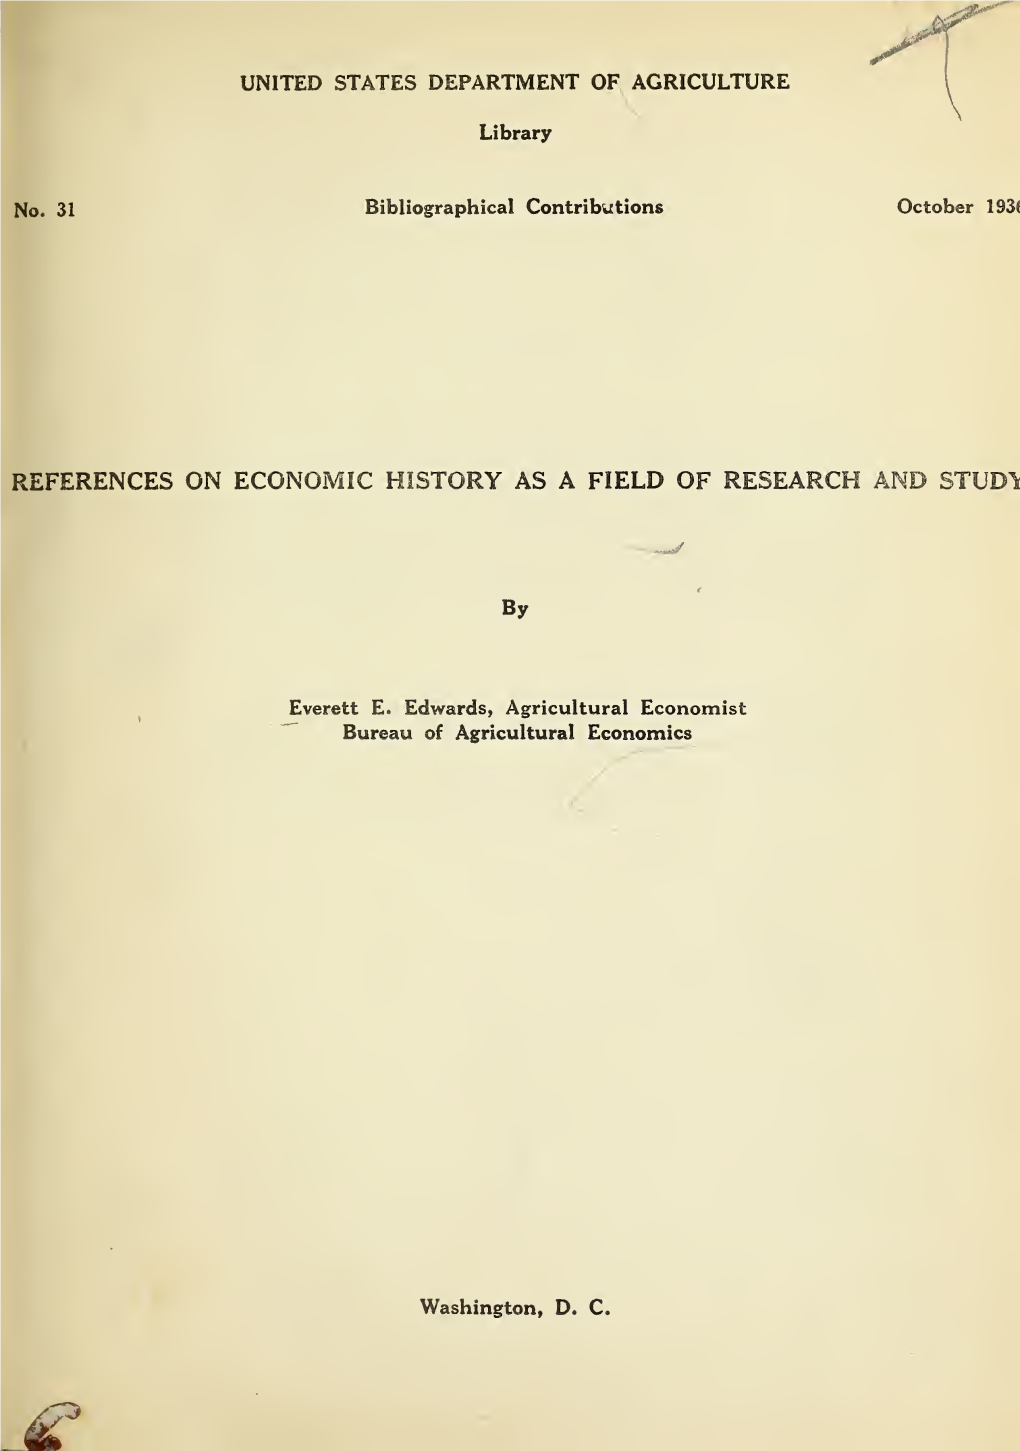 References on Economic History As a Field of Research and Study